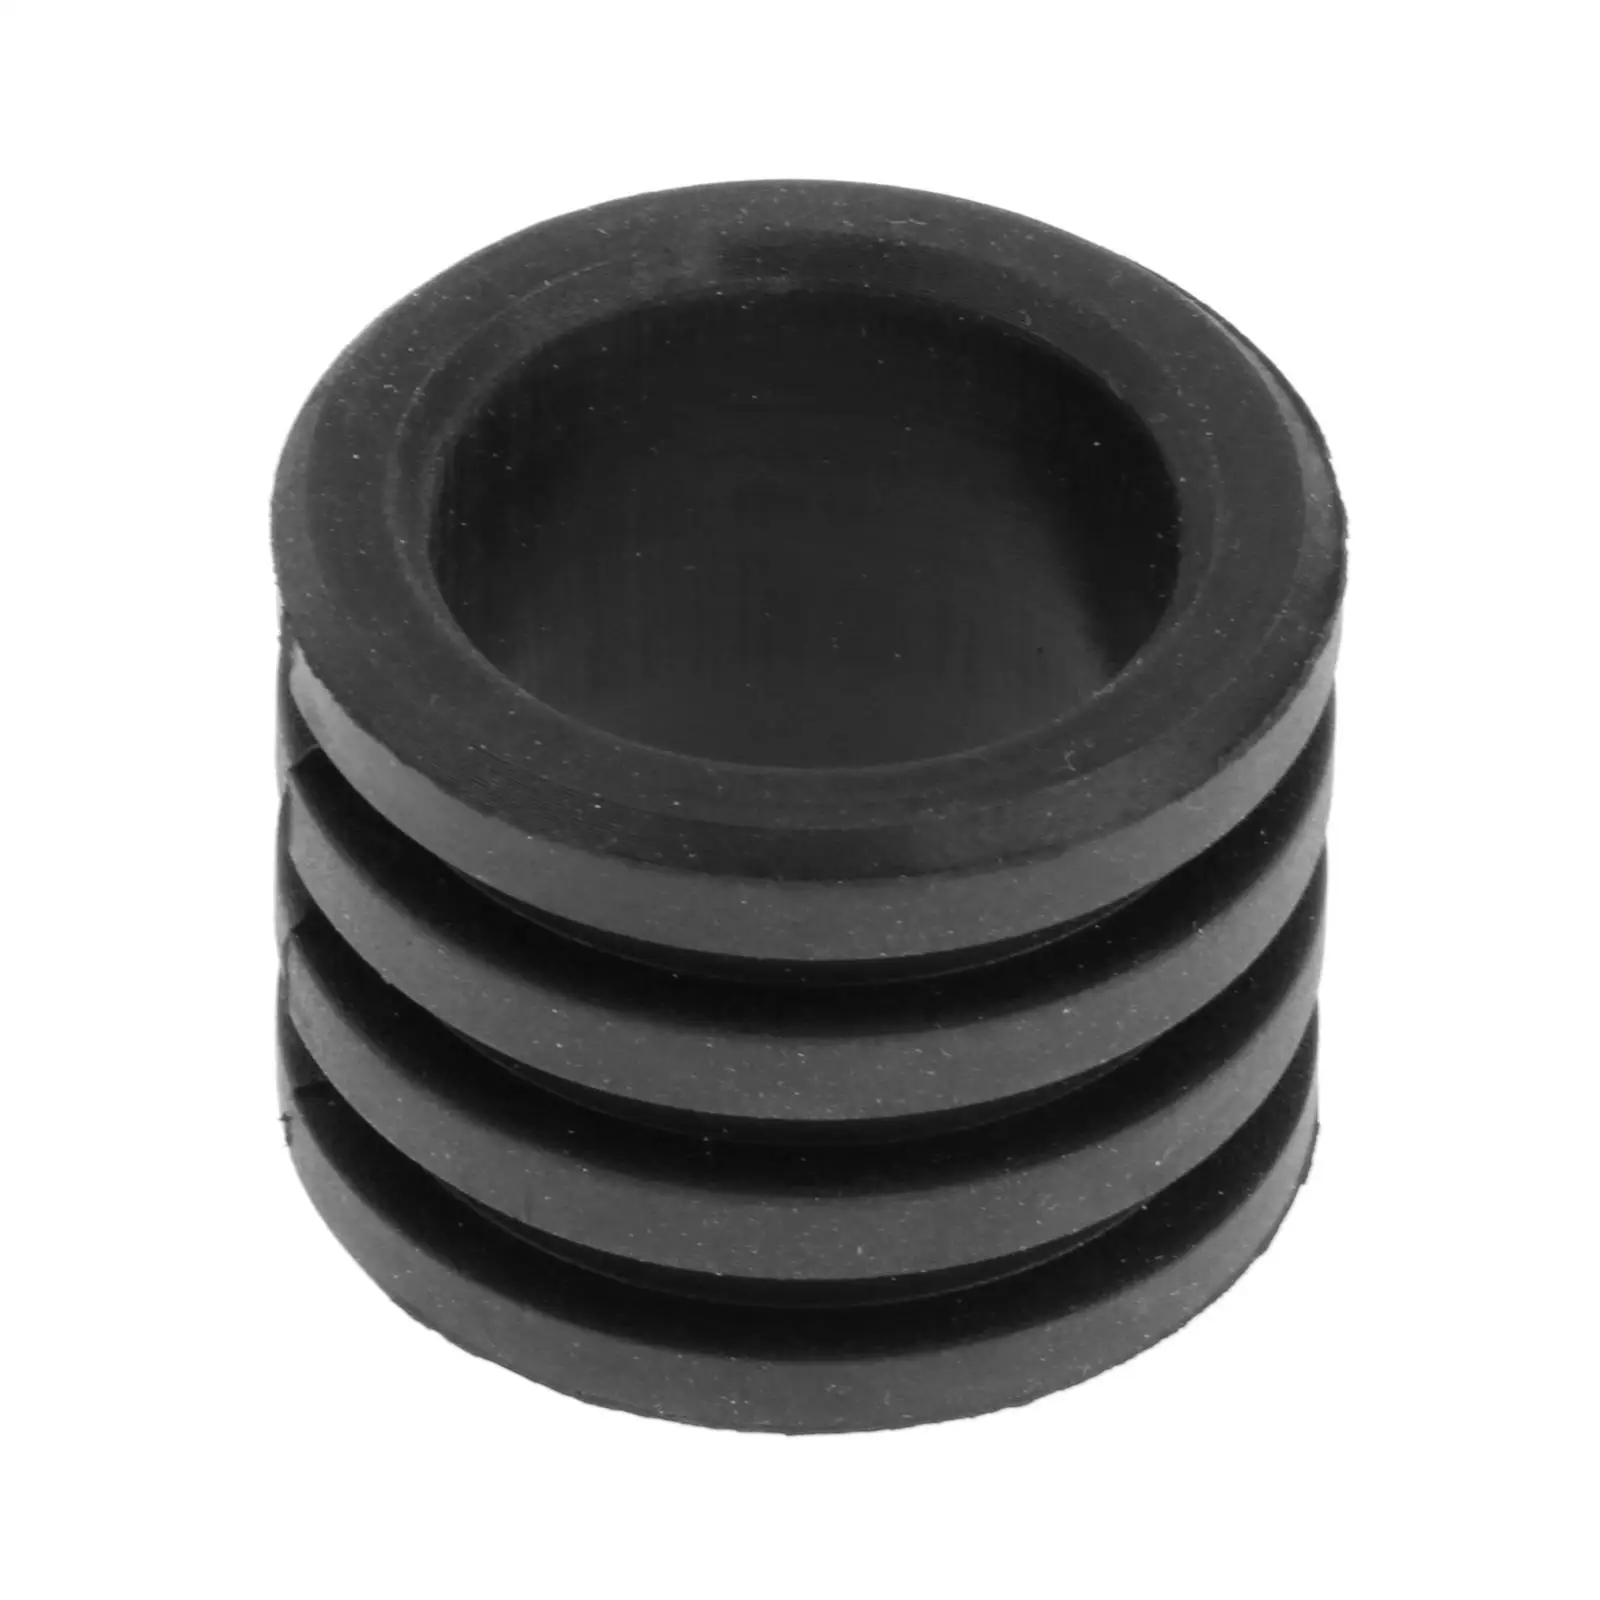 Exhaust Gasket Rubber Flange for 1984-2007 18365 KA4 730 Spare Parts